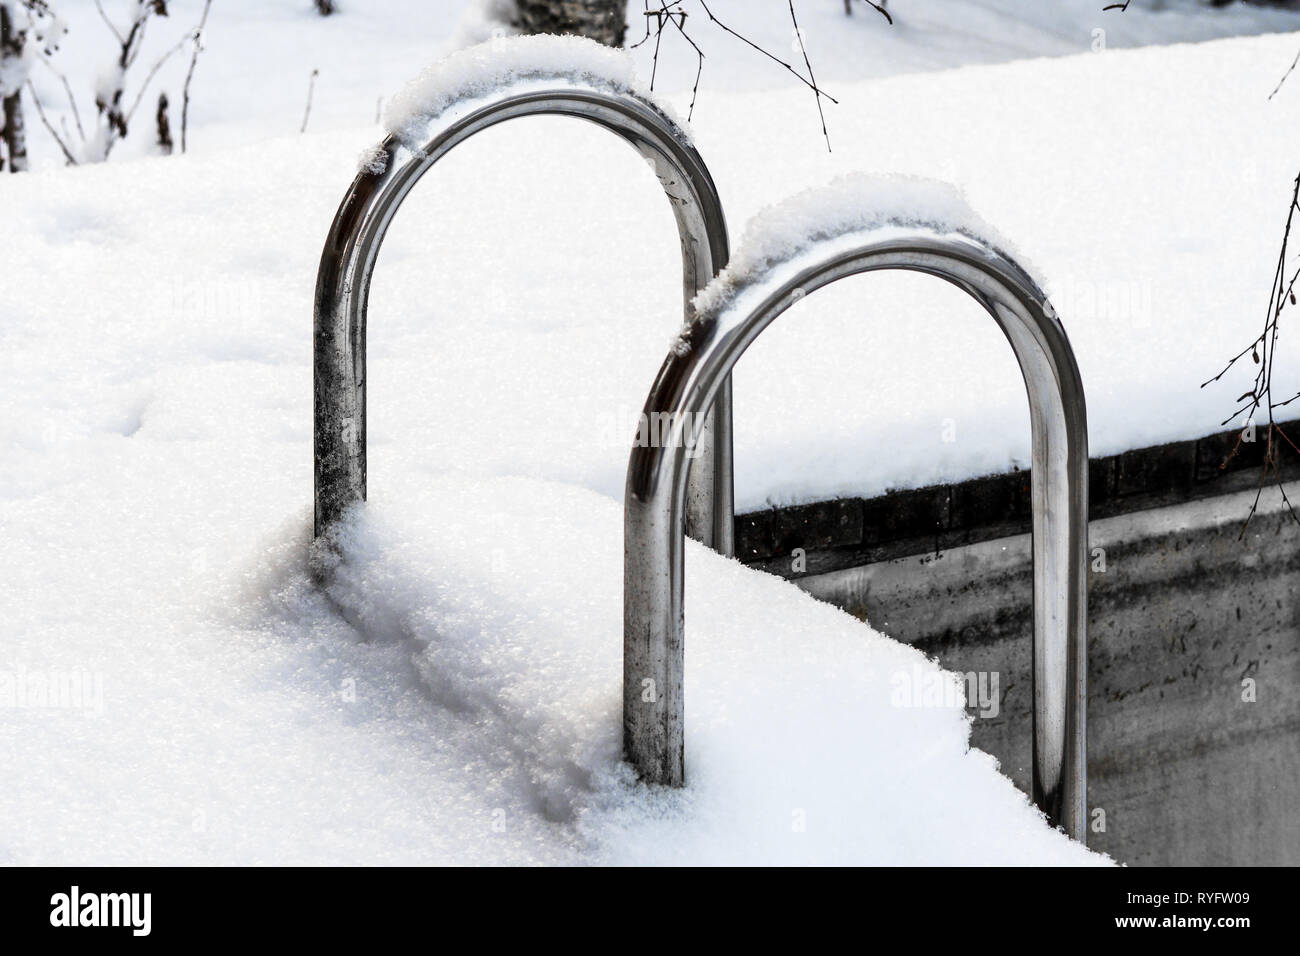 metal staircase in the outdoor pool covered by snow Stock Photo